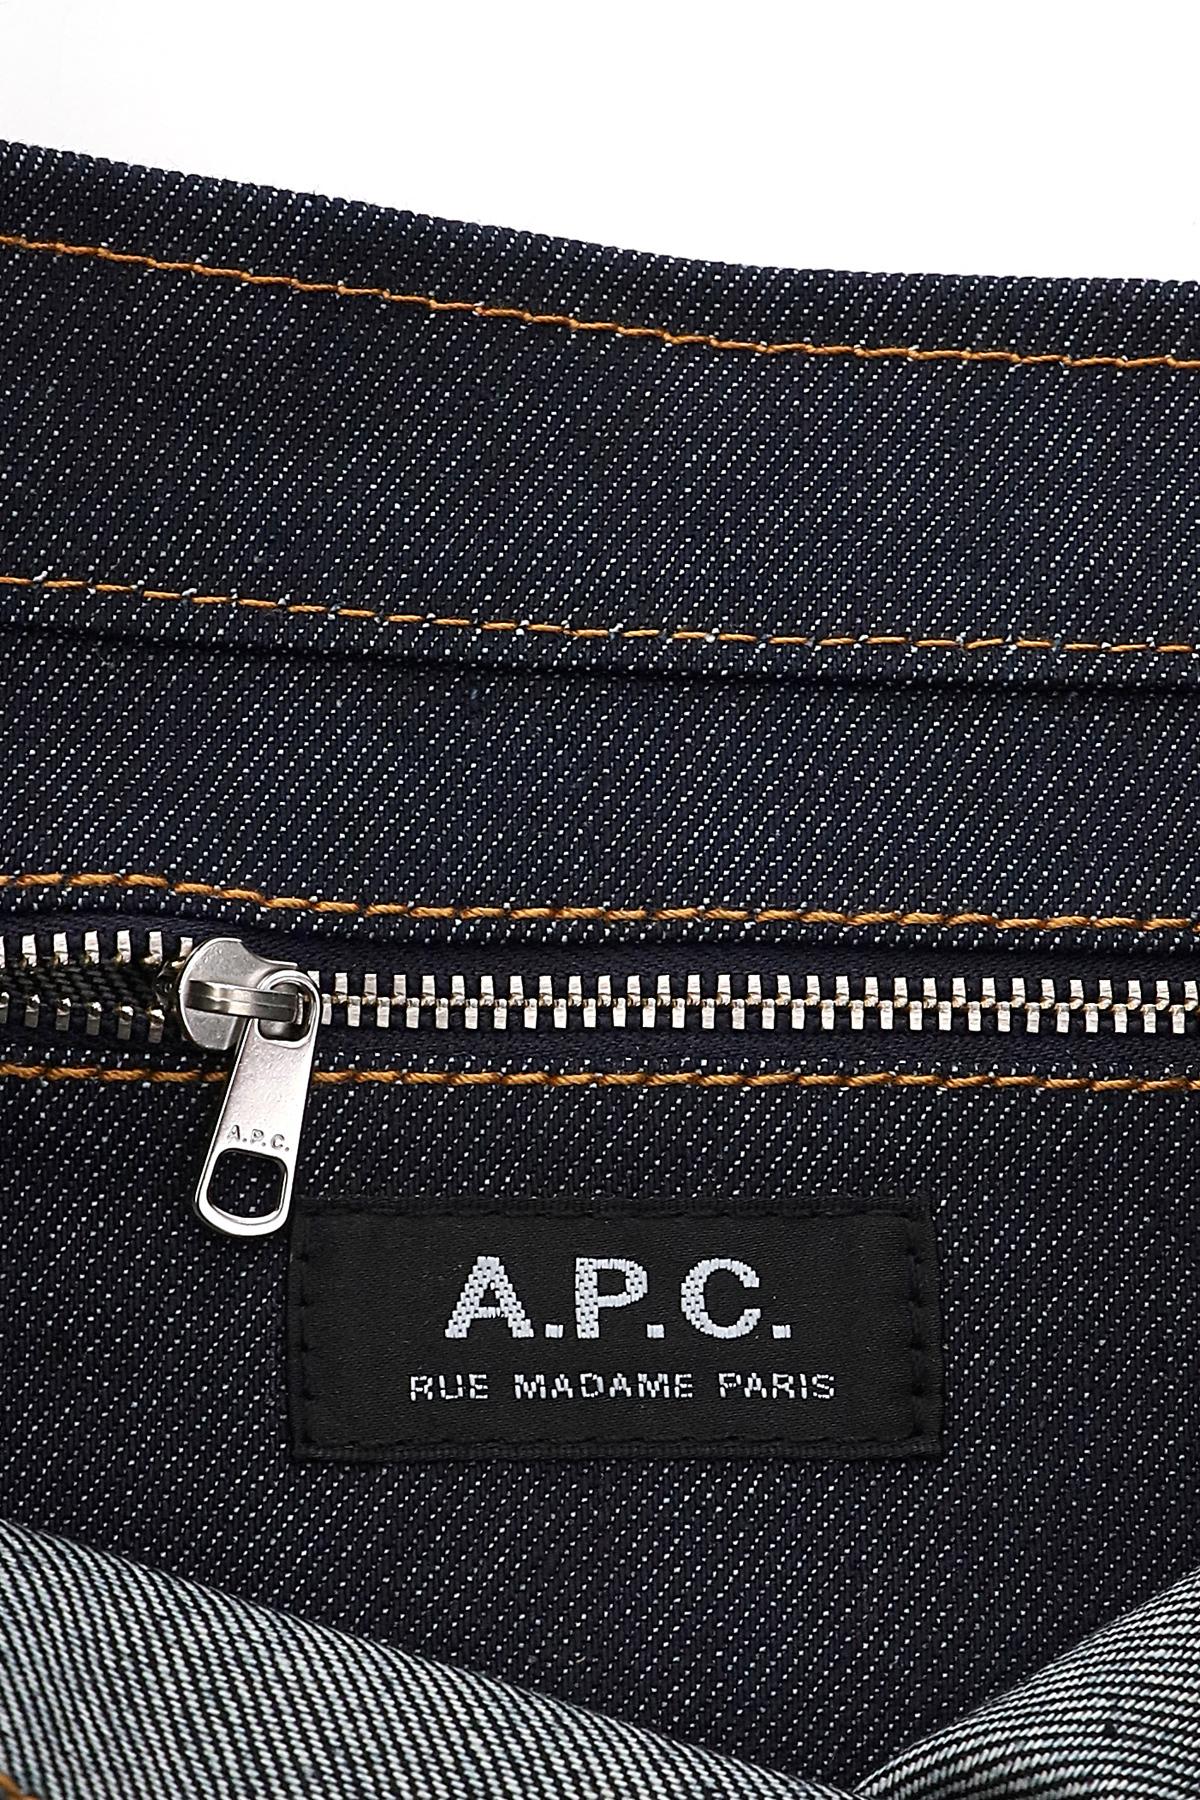 A.P.C. Unveils a Set of Axel Tote Bags